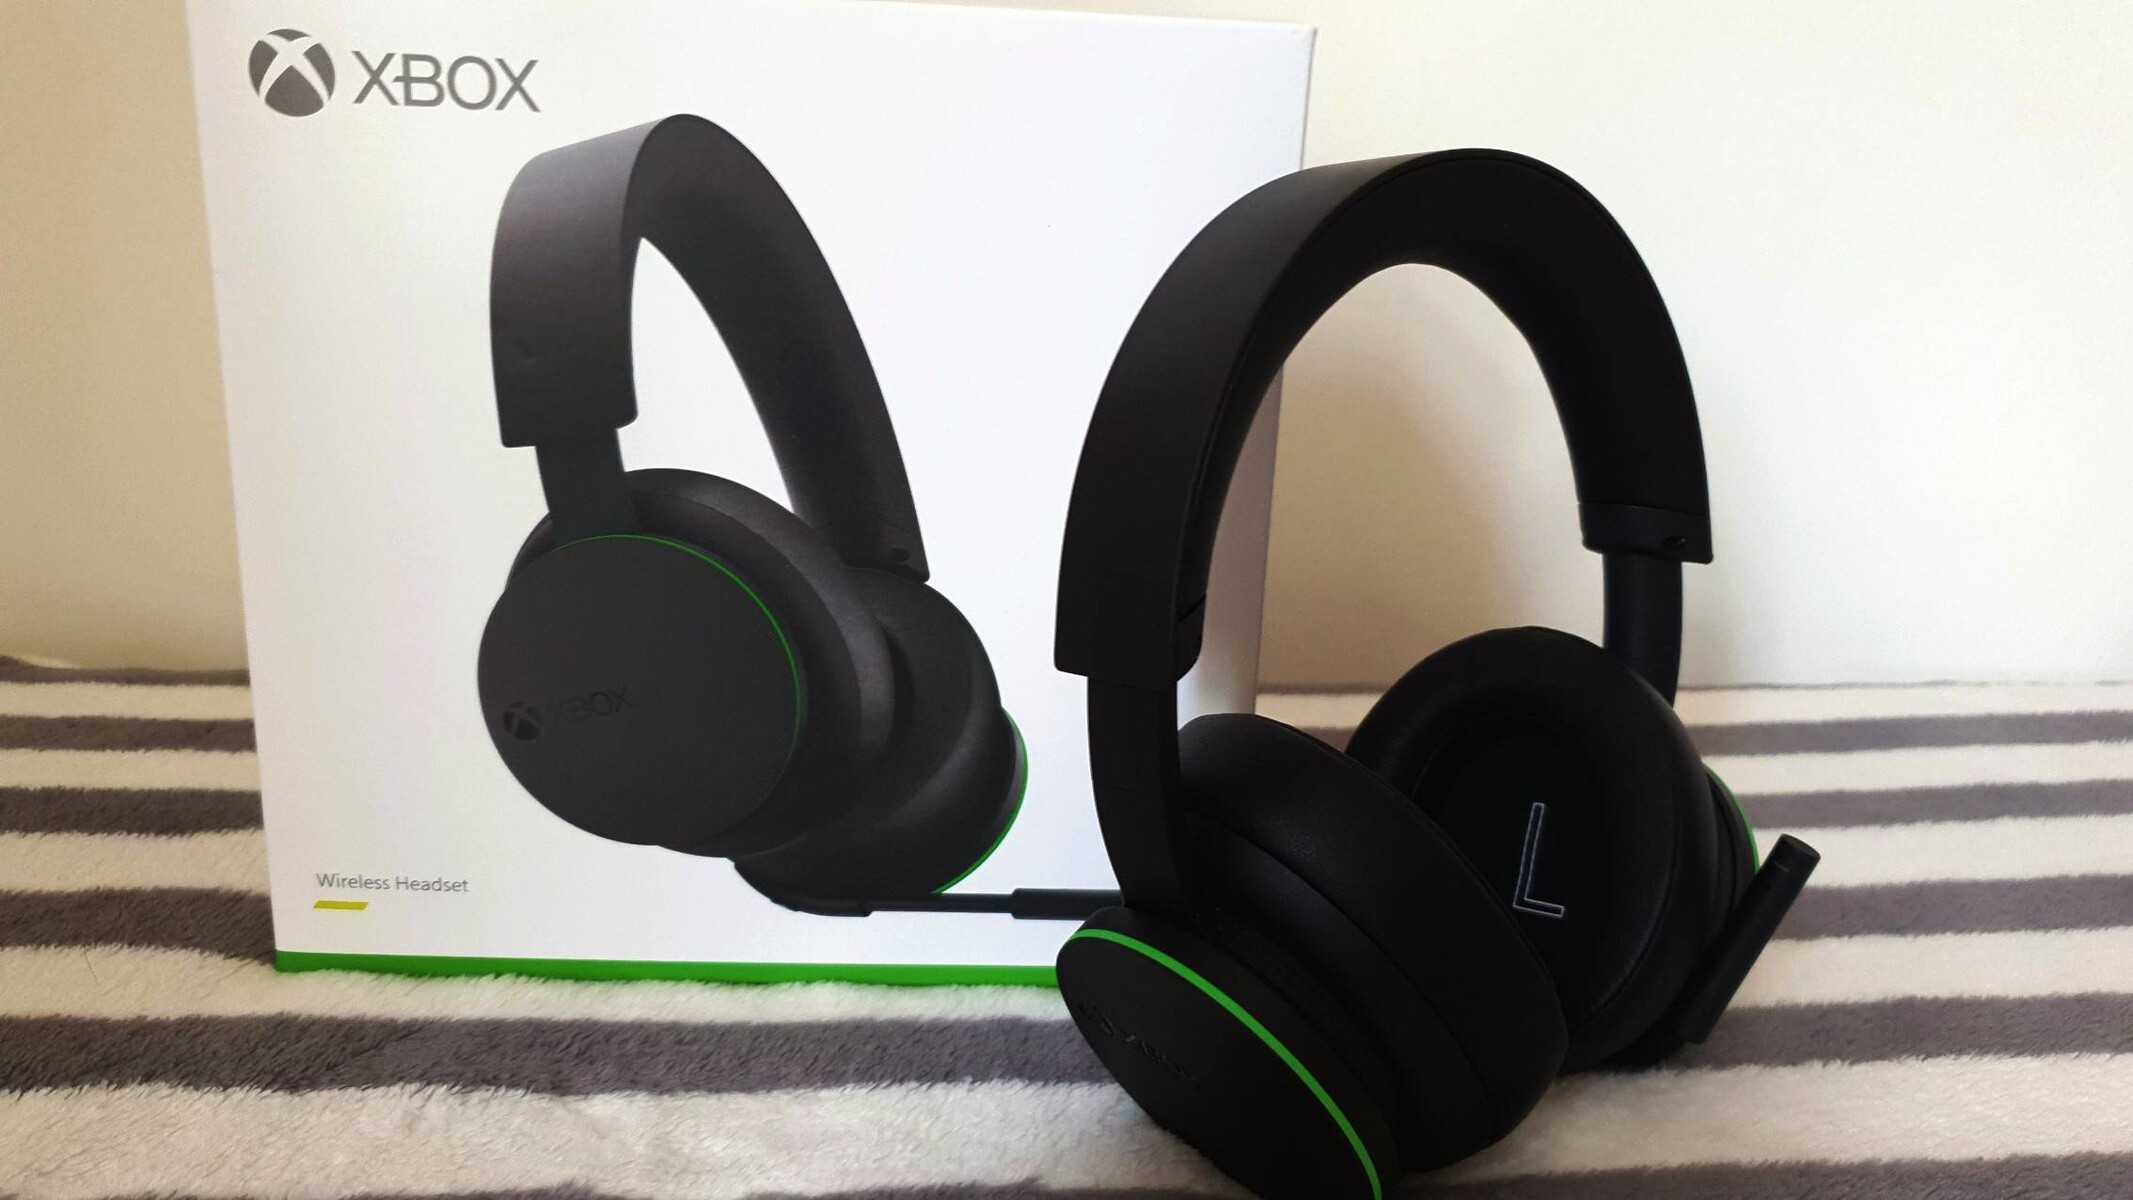 How To Connect Magnavox Gaming Headset To Xbox One